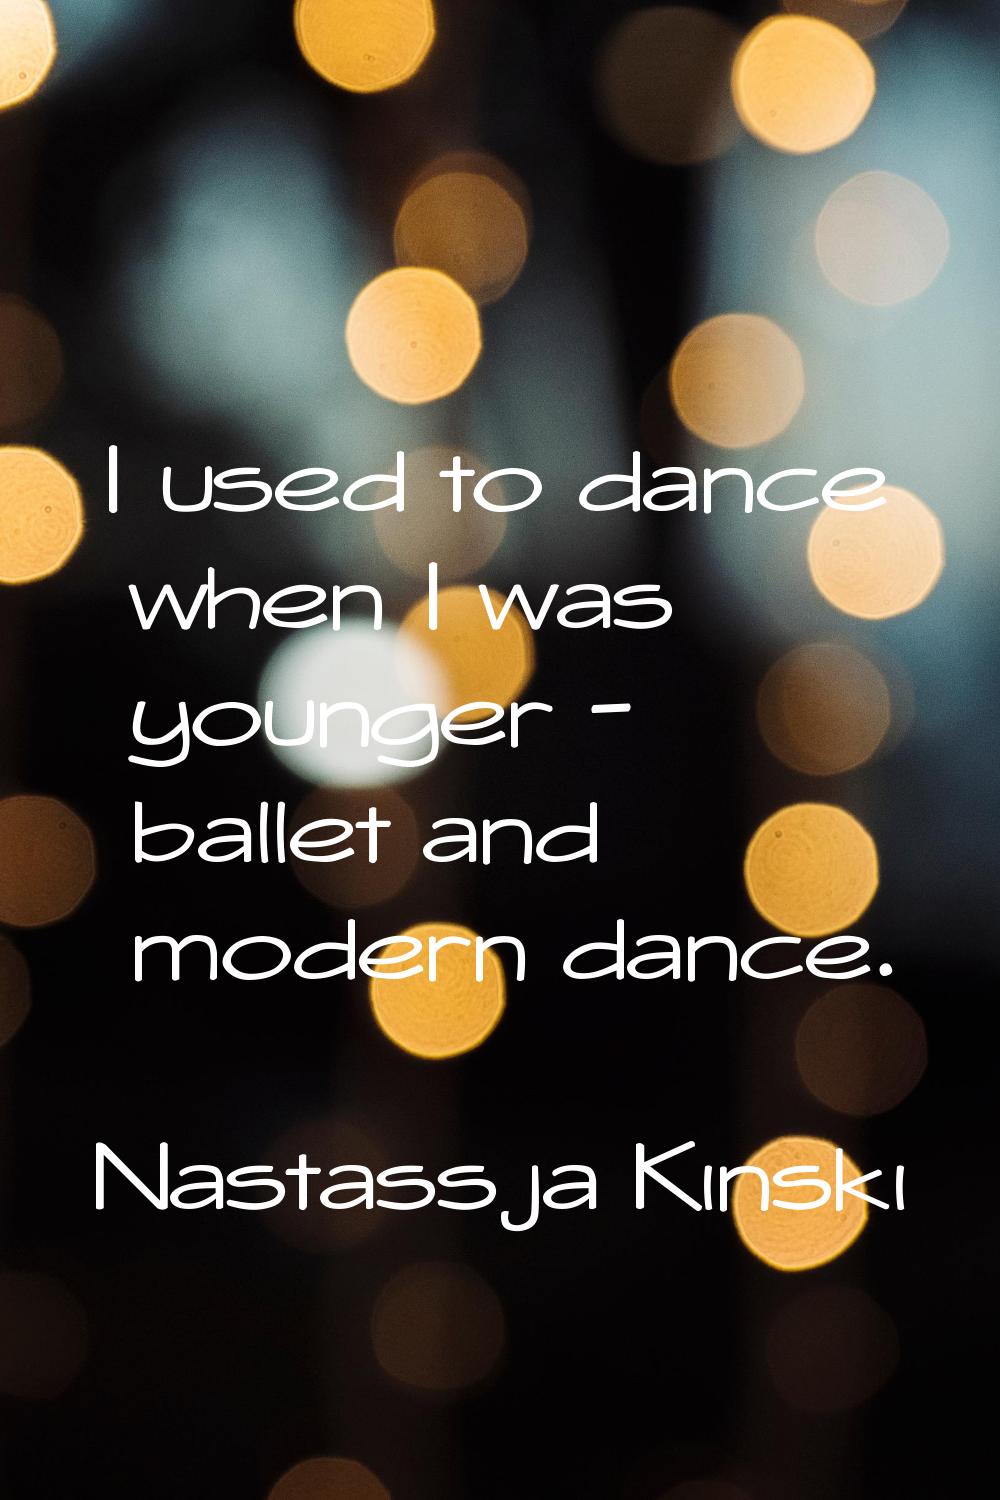 I used to dance when I was younger - ballet and modern dance.